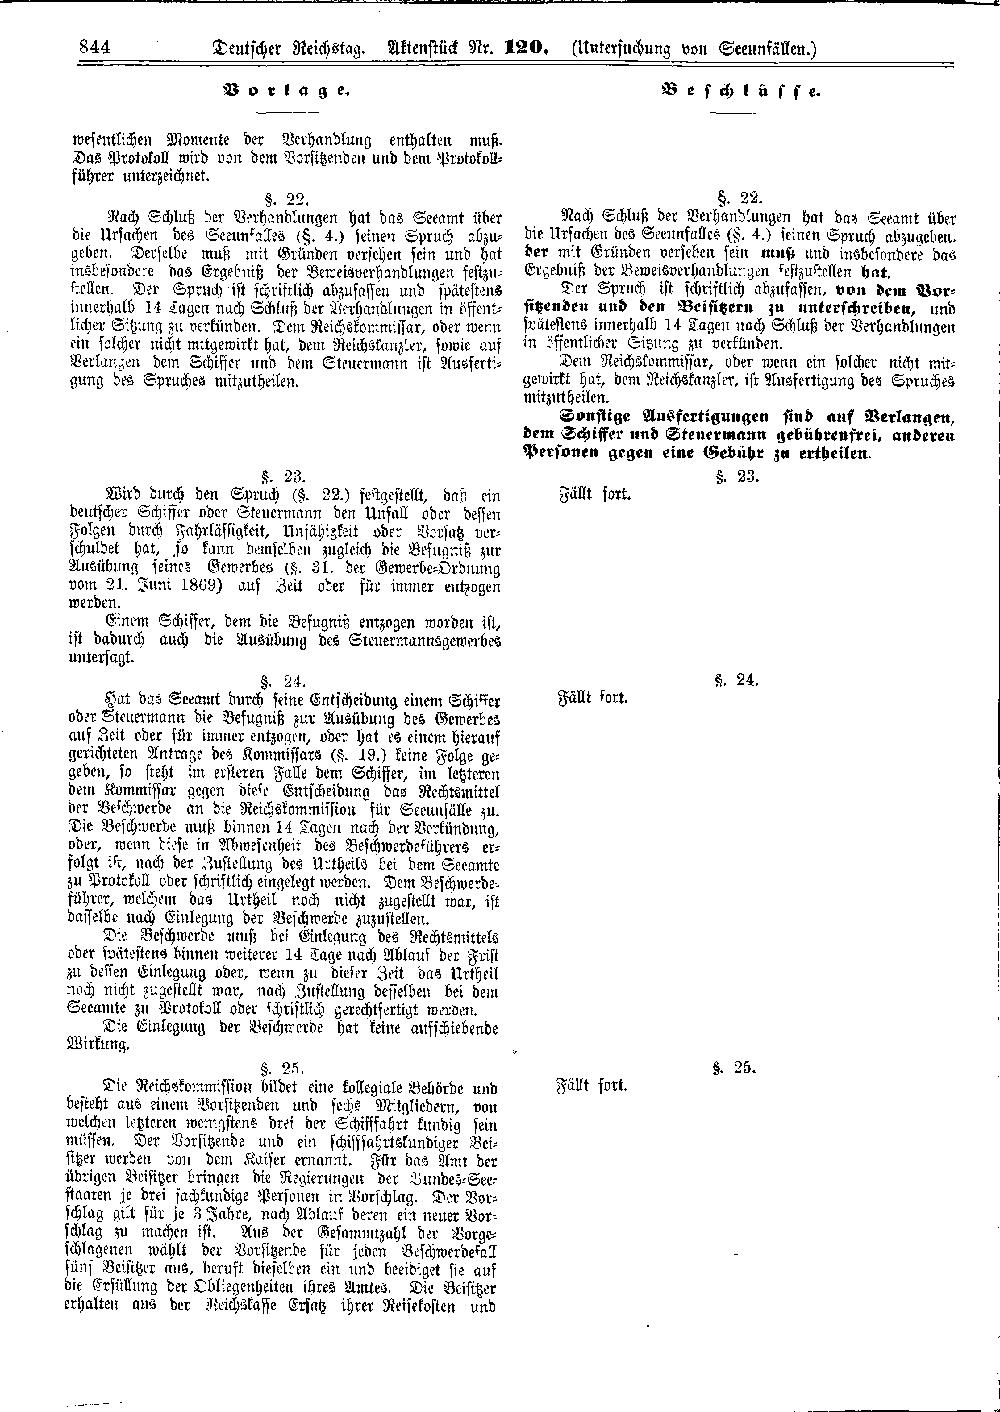 Scan of page 844